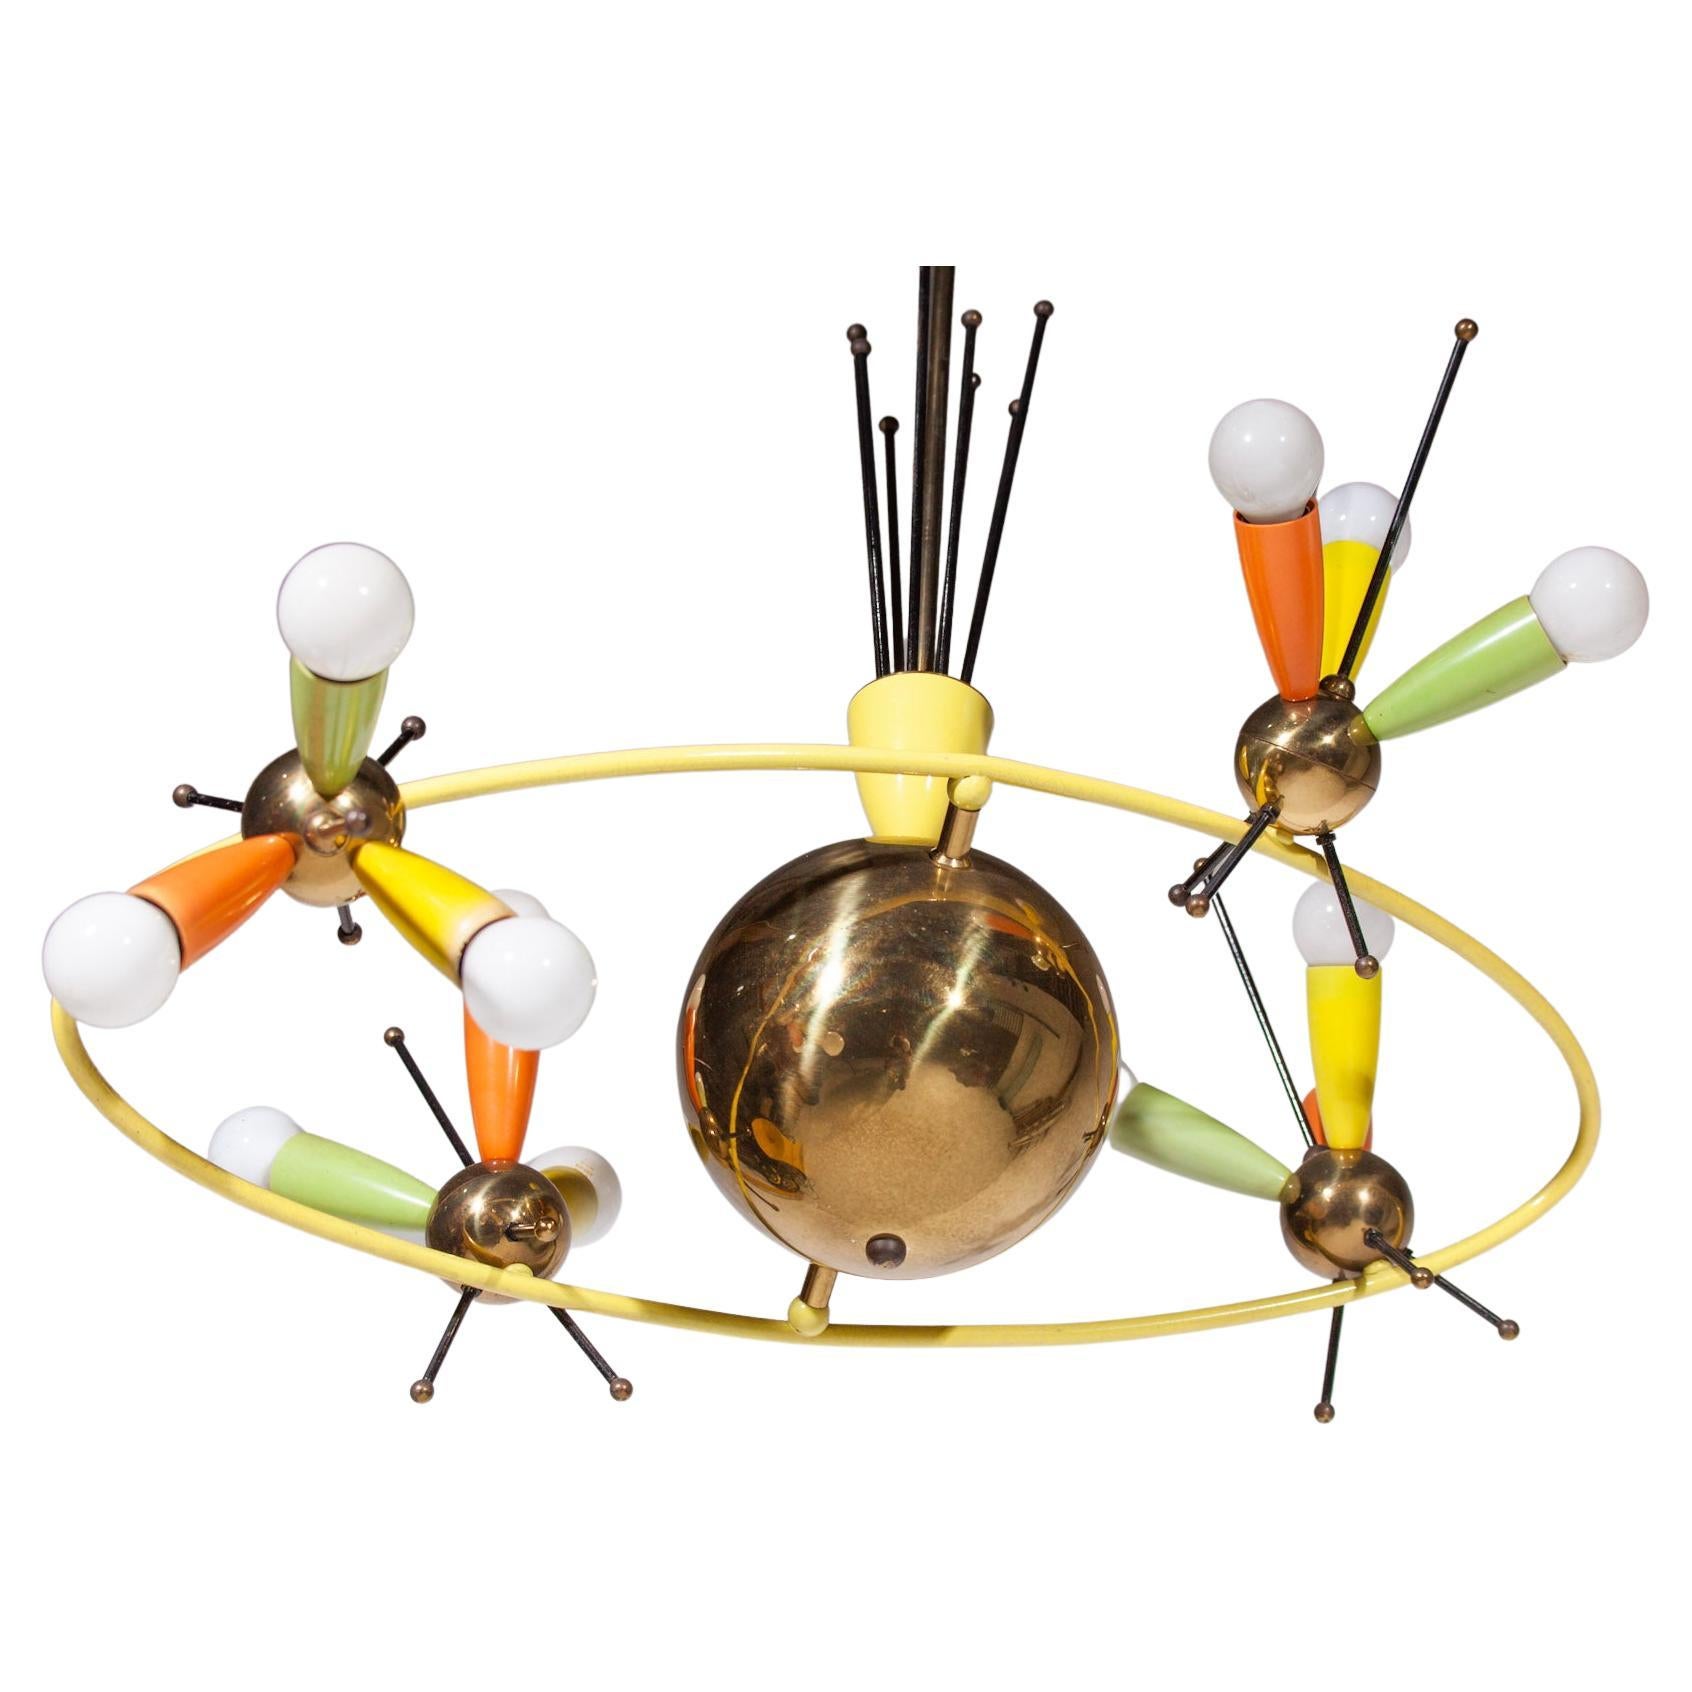 Rare authentic brass Spage Age Sputnik chandelier in style of Angelo Lelli, Italy, 1957. The eclips around the suggested planet with a rotating set of three star lights in the colors yellow, orange and green gives a real space effect especially when